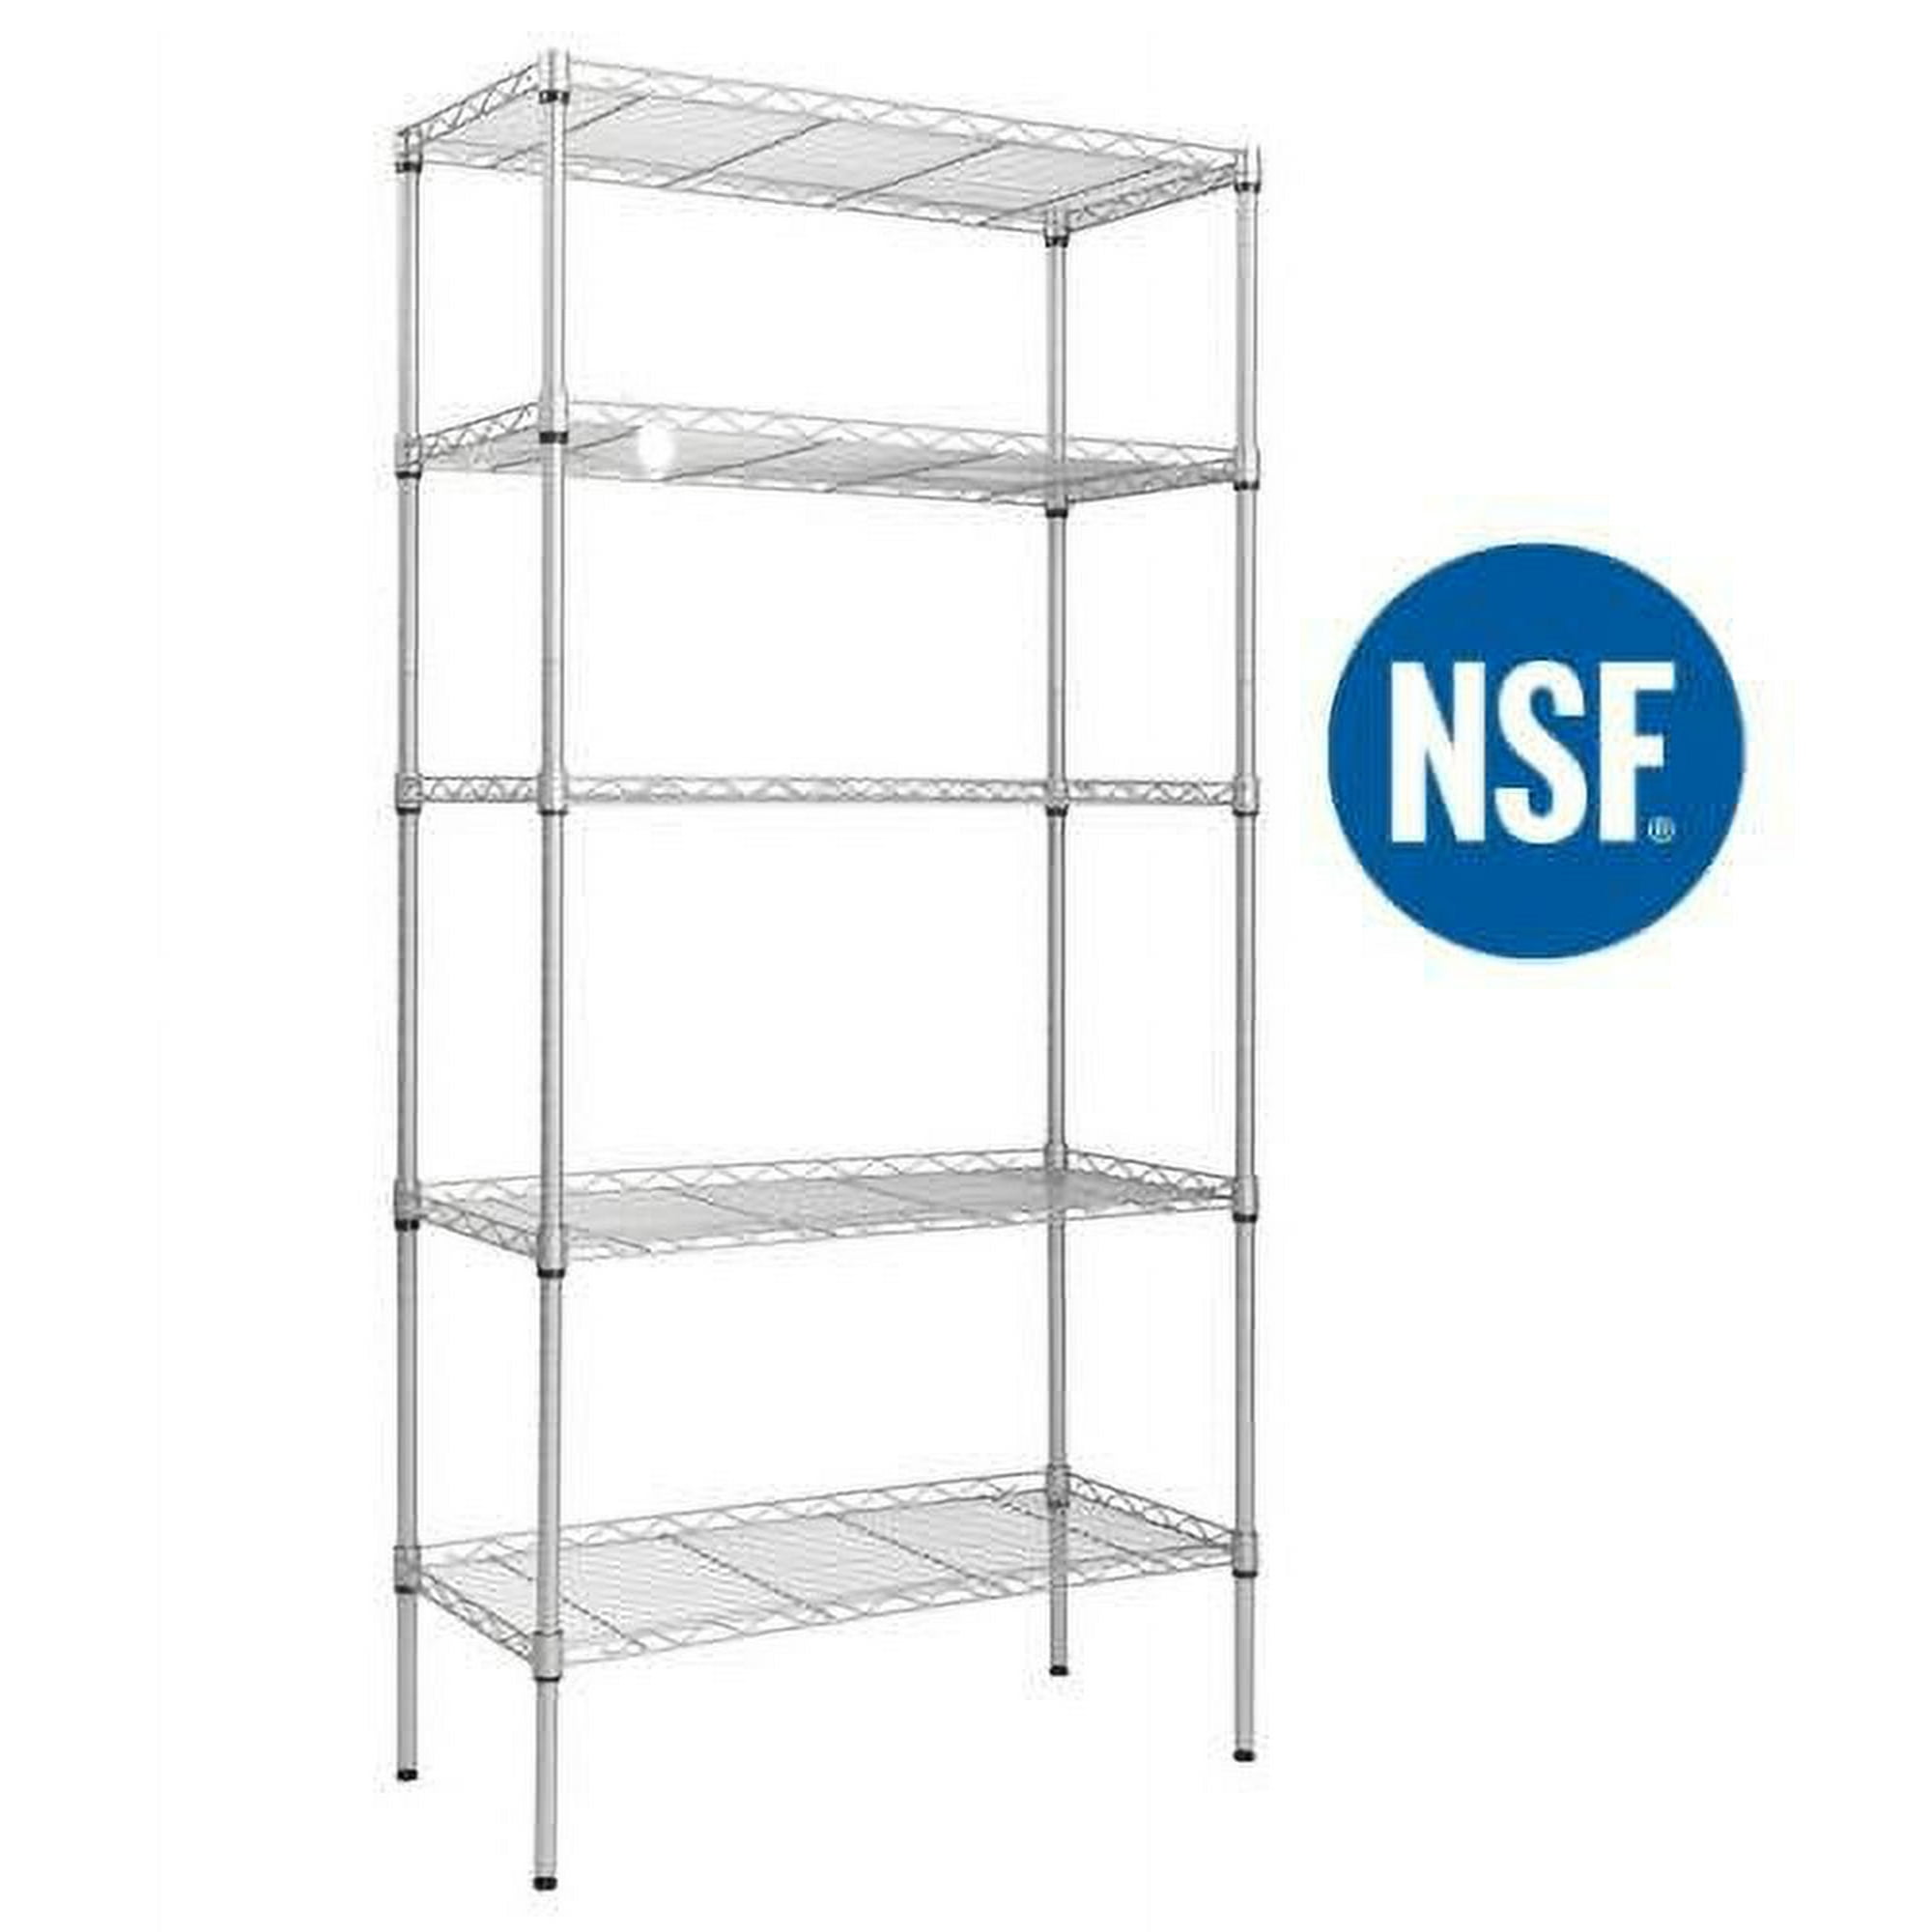 5-Tier Ktaxon Wire Shelving Unit Storage Rack (Silver) $39.89 + Free Shipping